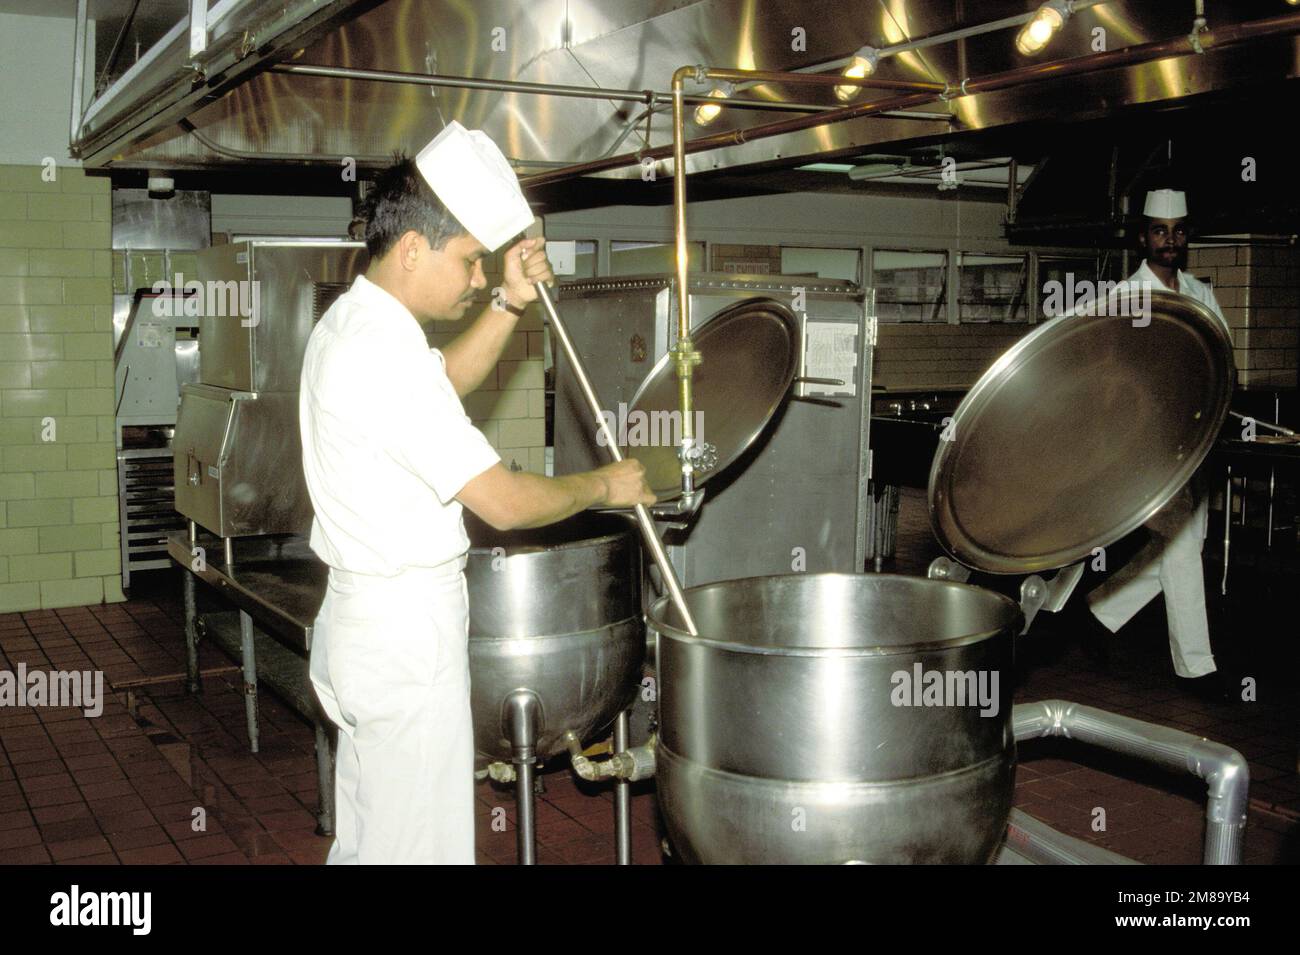 An airman apprentice stirs a soup kettle in the kitchen of the enlisted mess. Base: Naval Air Station, Oceana State: Virginia (VA) Country: United States Of America (USA) Stock Photo